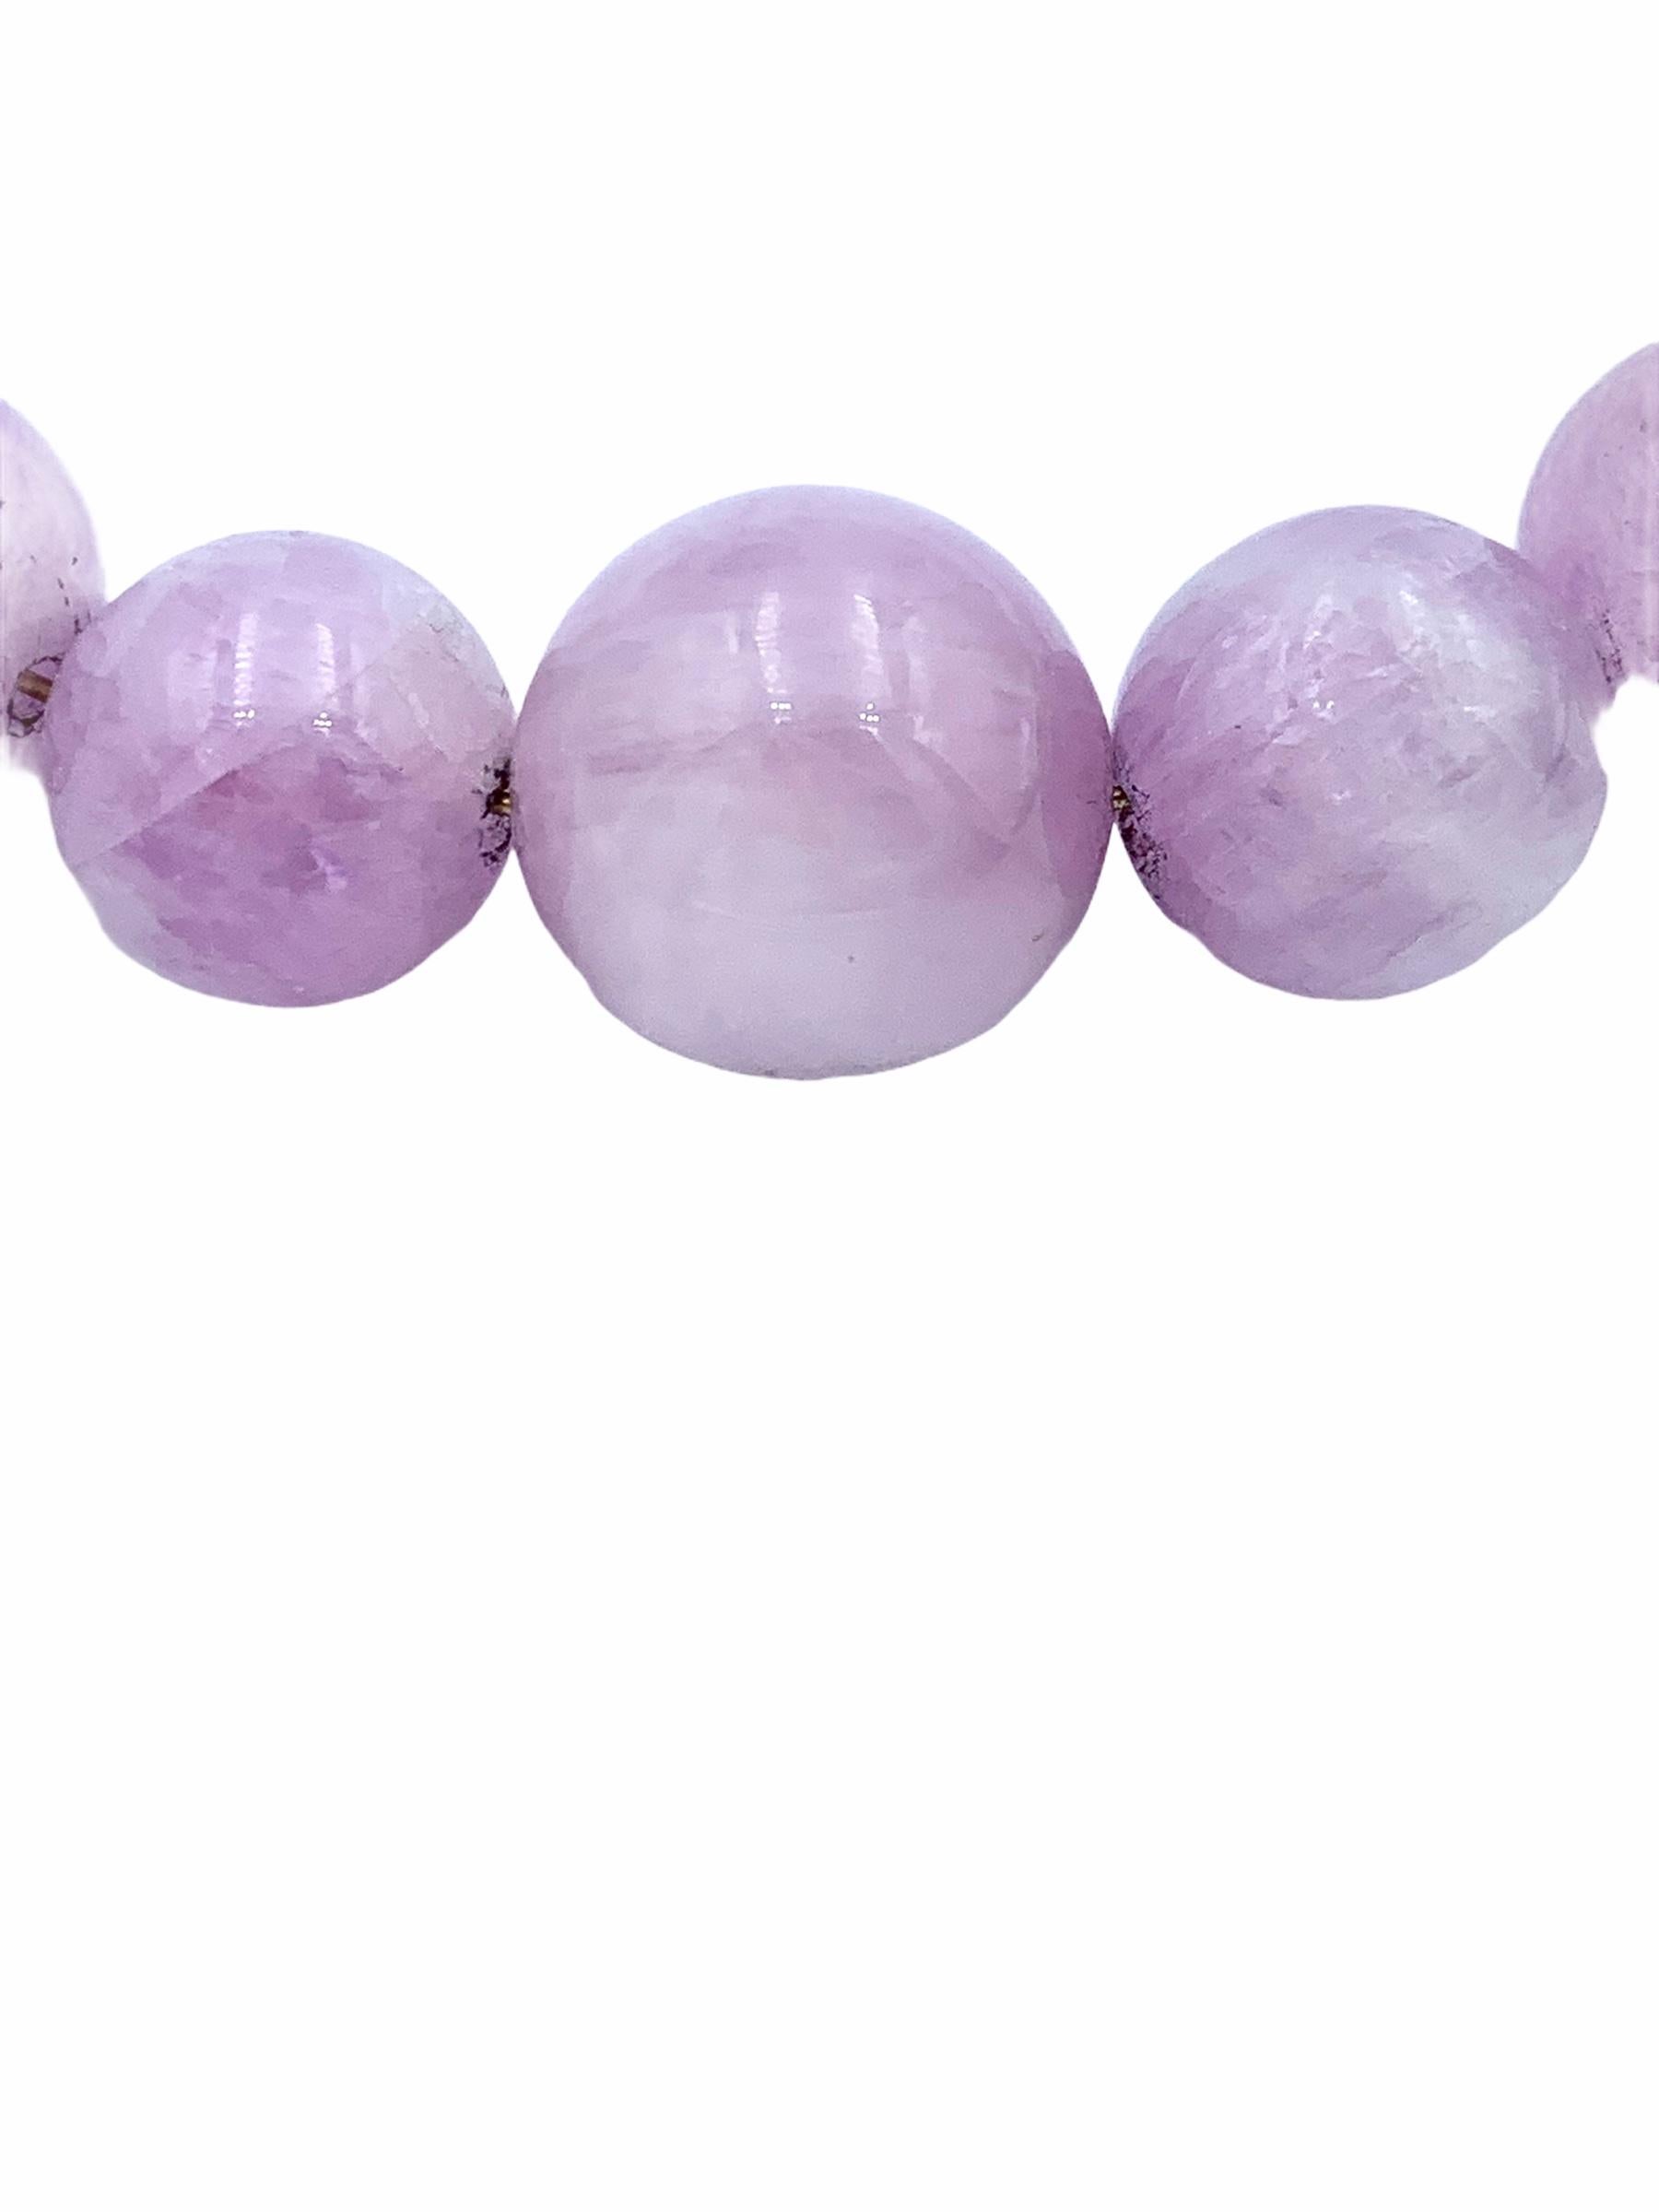 Hand made using 14 carat Yellow Gold, the suspended Kunzite beads are threaded together with a solid gold wire and graduated onto a delicate 1.3 mm cable chain. The subtly lilac and pink hues have a centre bead which measures 12 mm in size, 10mm the